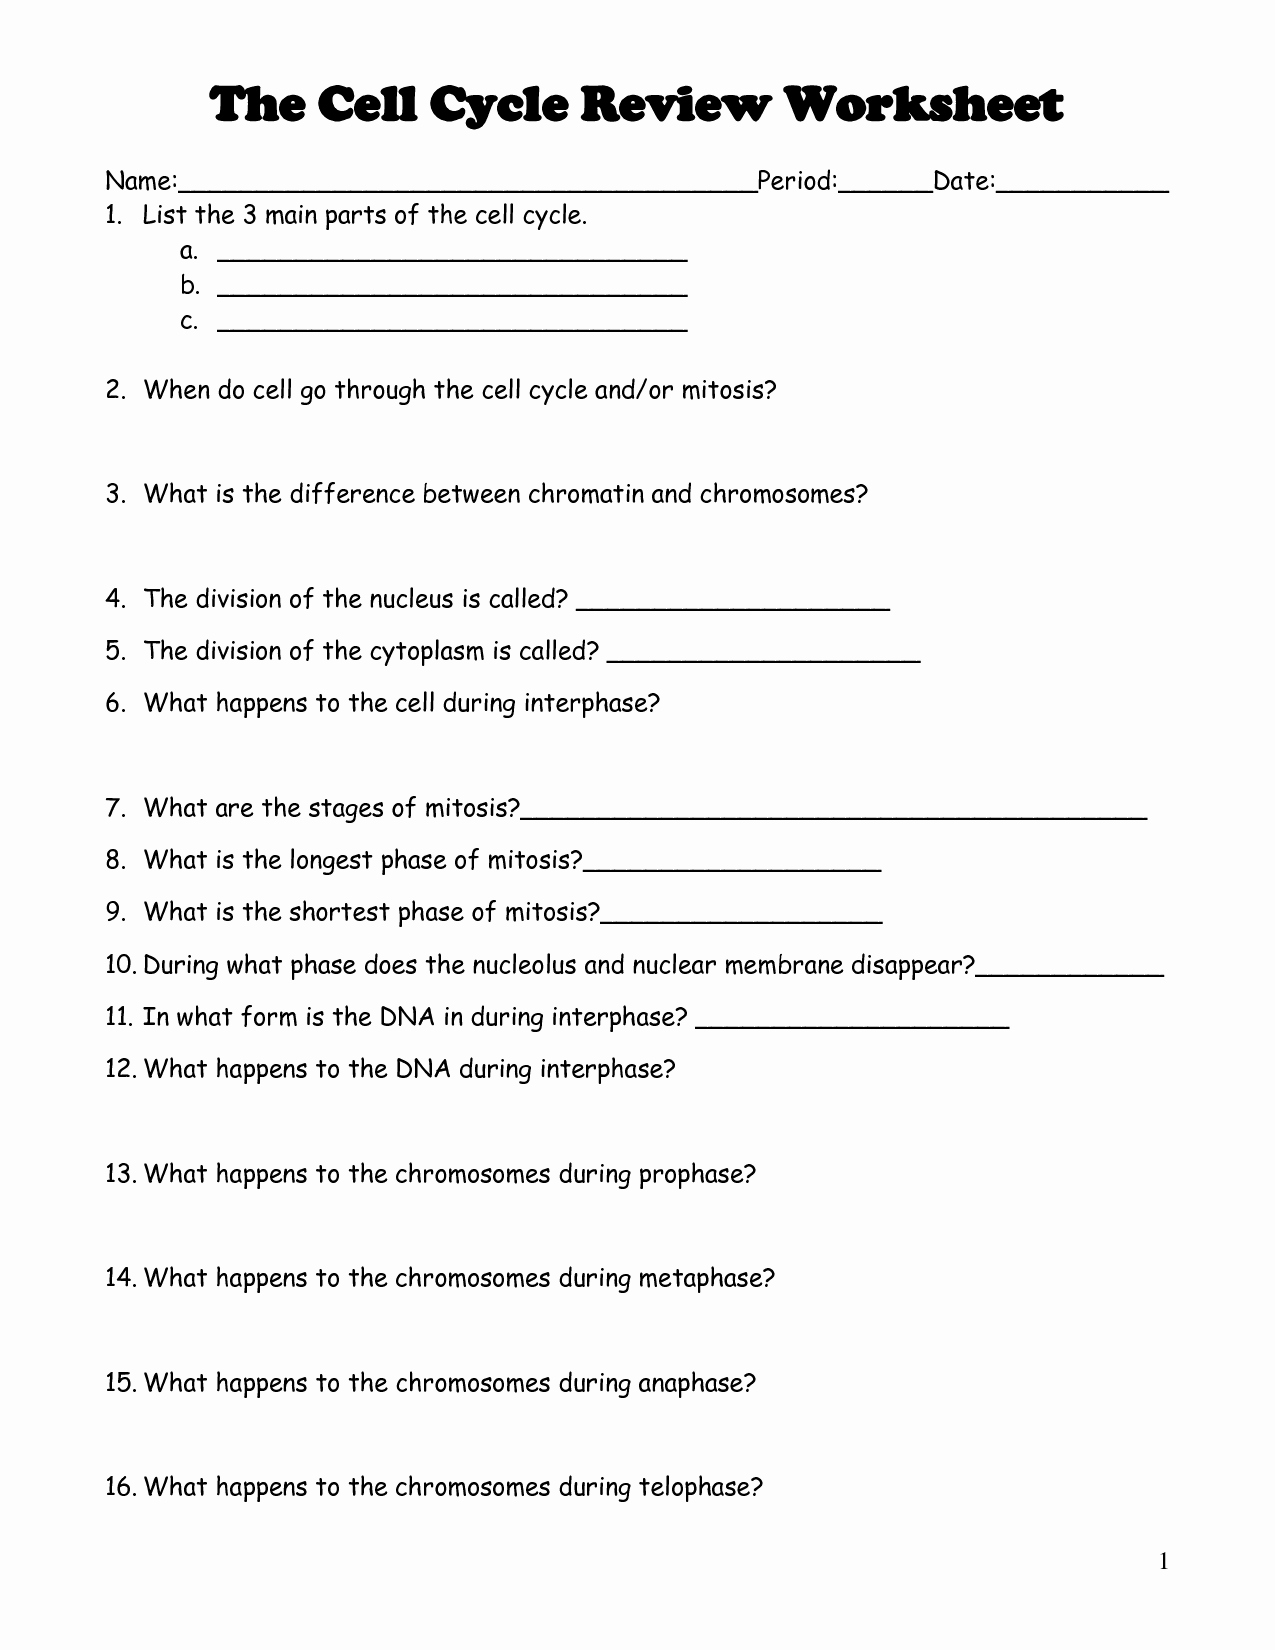 The Cell Cycle Worksheet Answers Inspirational 18 Best Of Cell Cycle Review Worksheet Answers